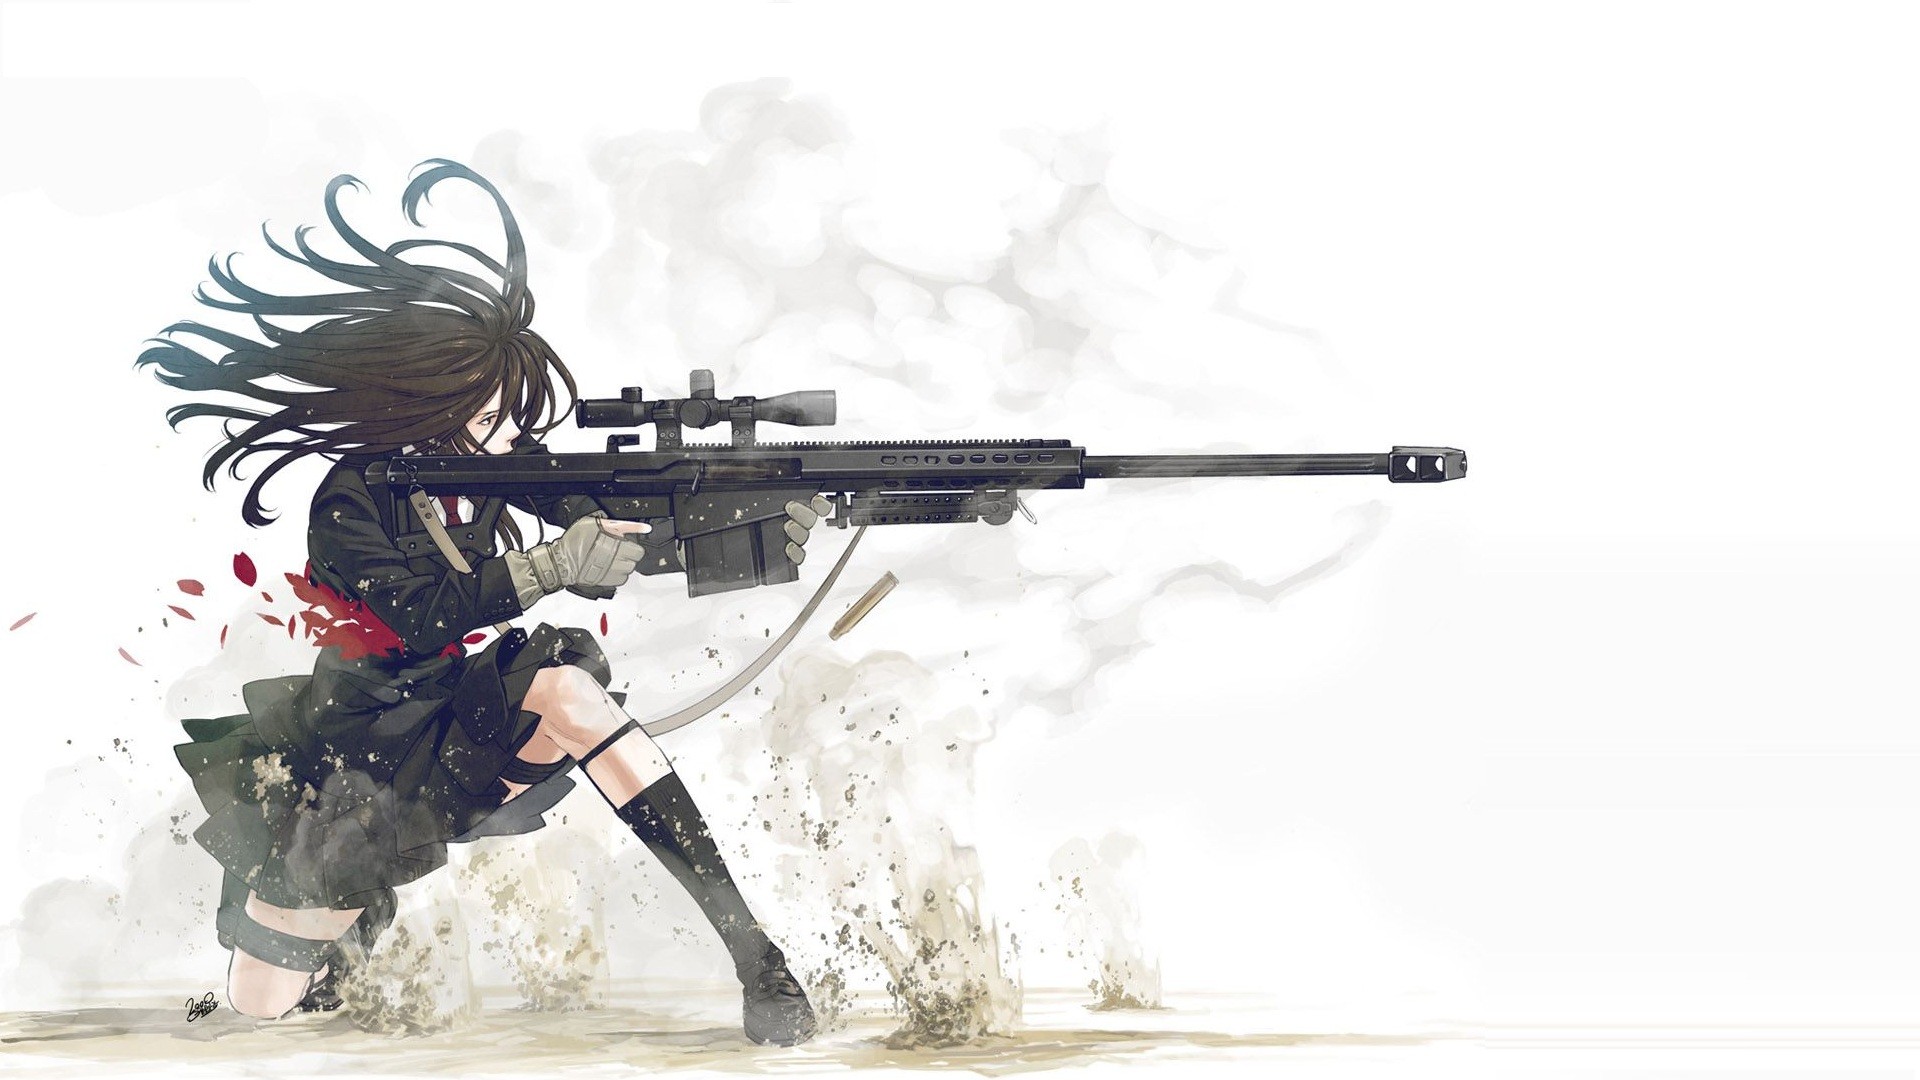 1920x1080 Anime Guns Weapons Manga Anime Girls White Background Sniper Rifles free  iPhone or Android Full HD wallpaper.